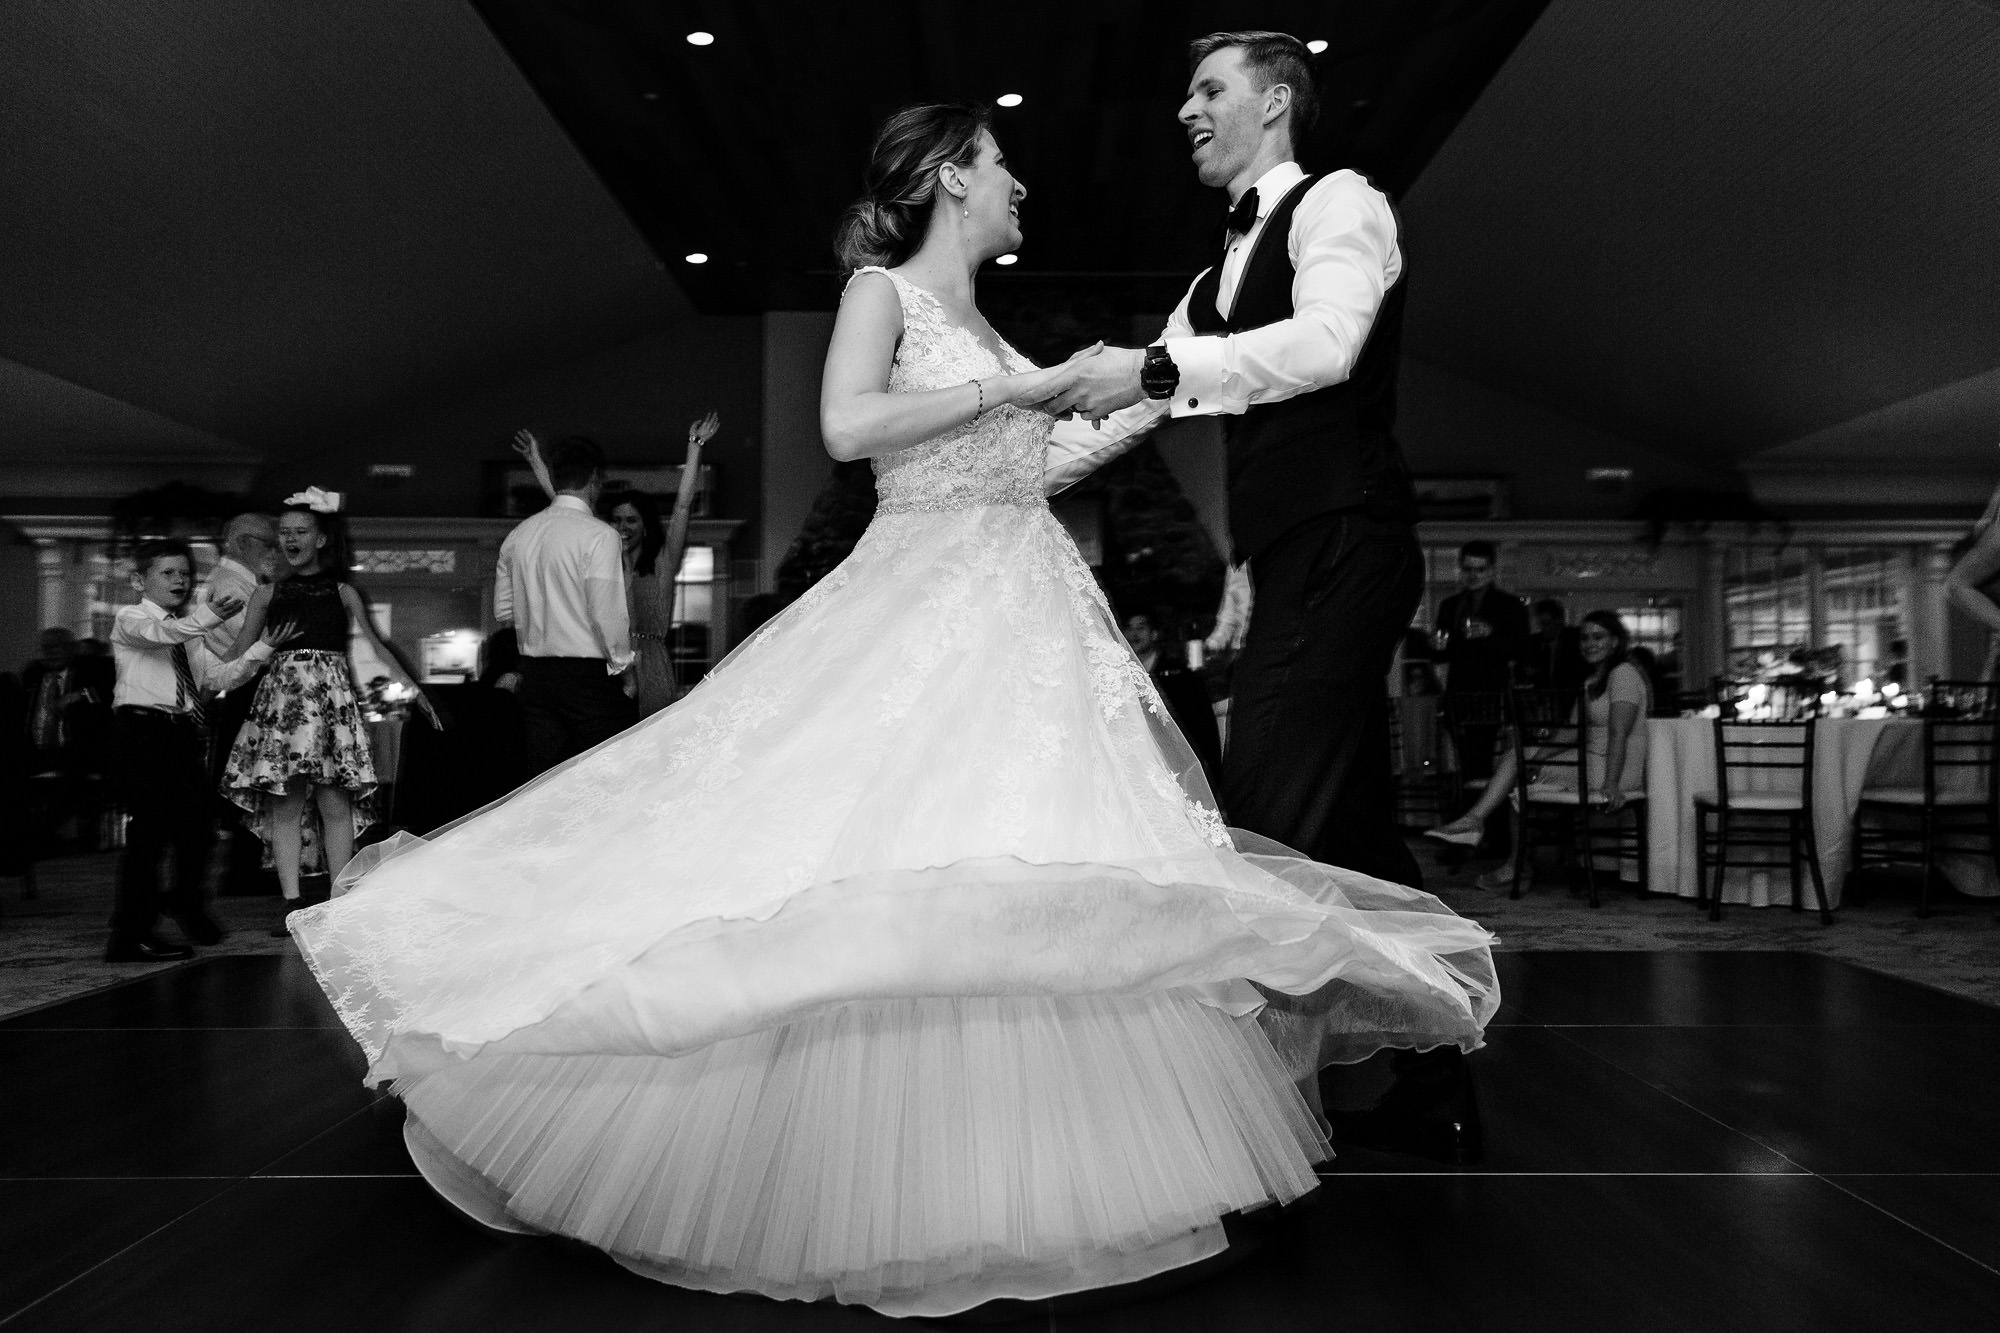 The bride and groom dance on their dance floor at their Maine wedding